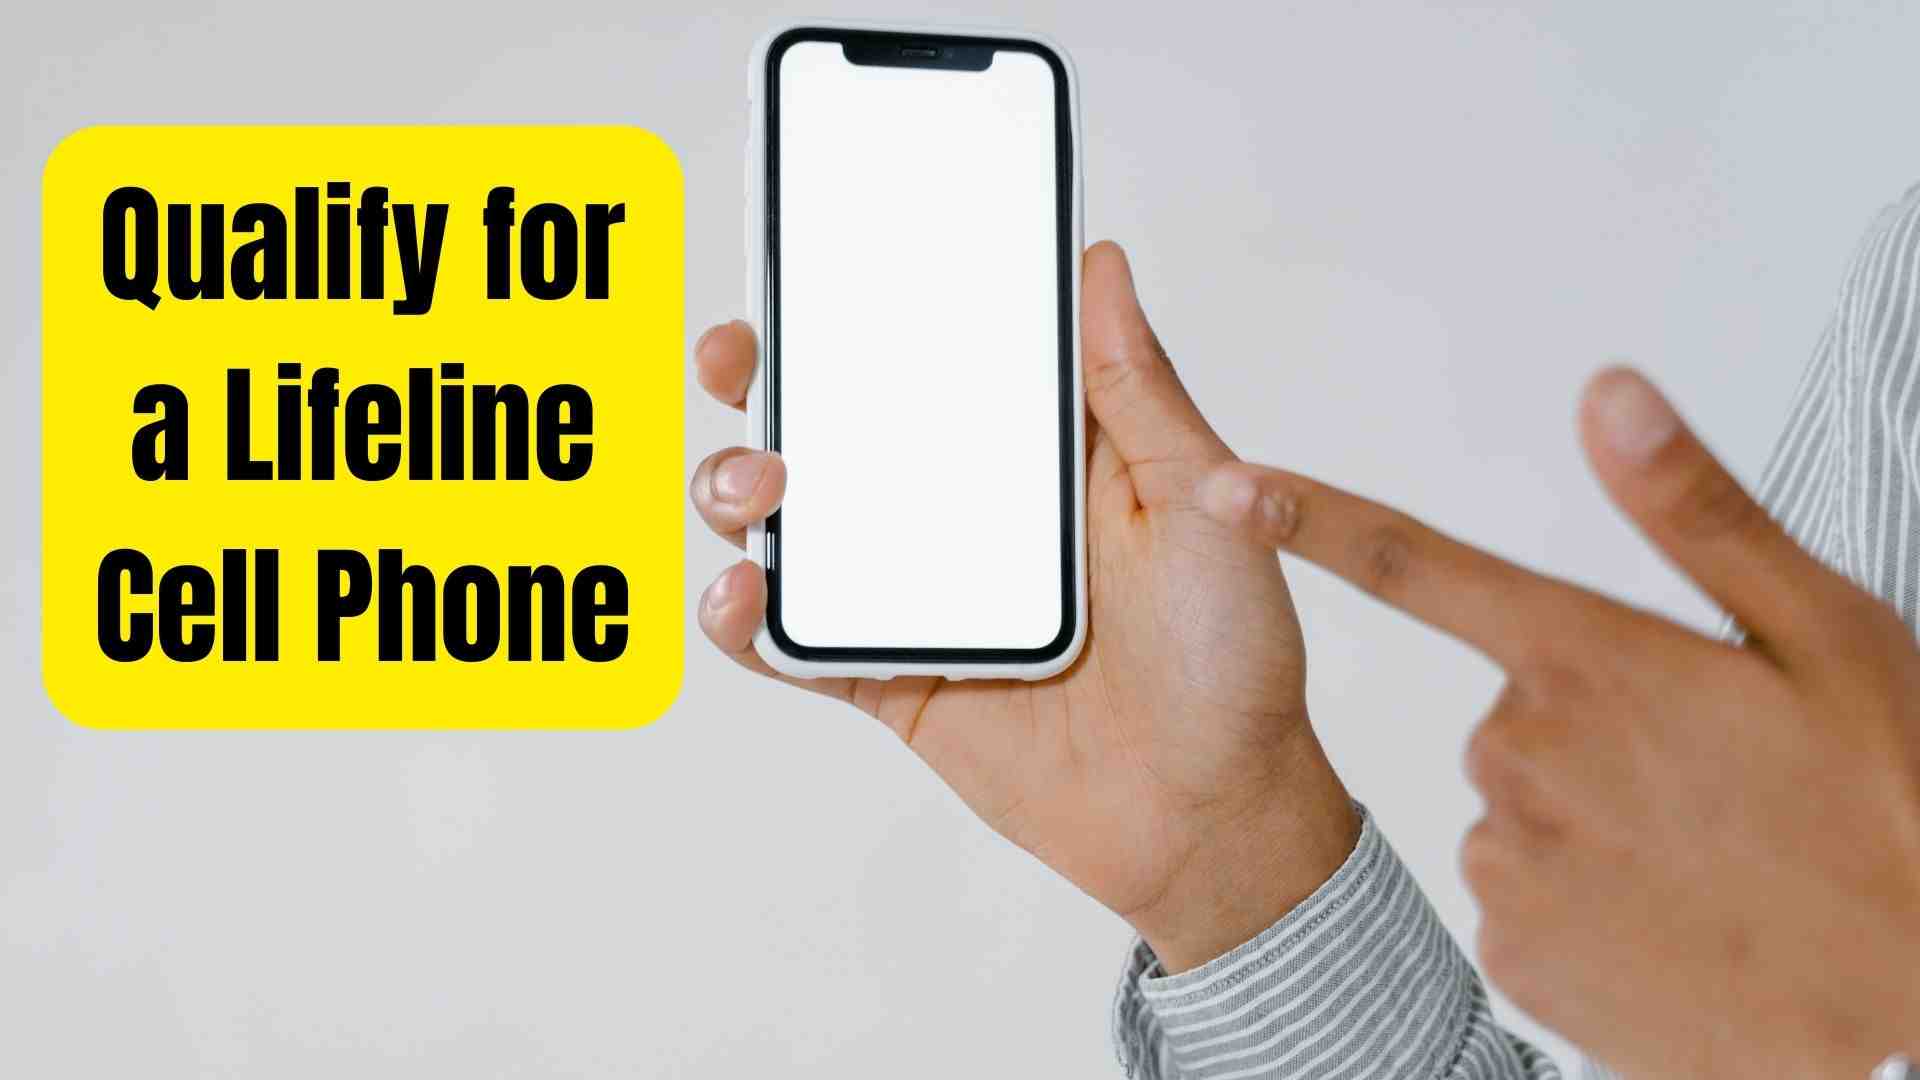 How to Qualify for a Lifeline Cell Phone?